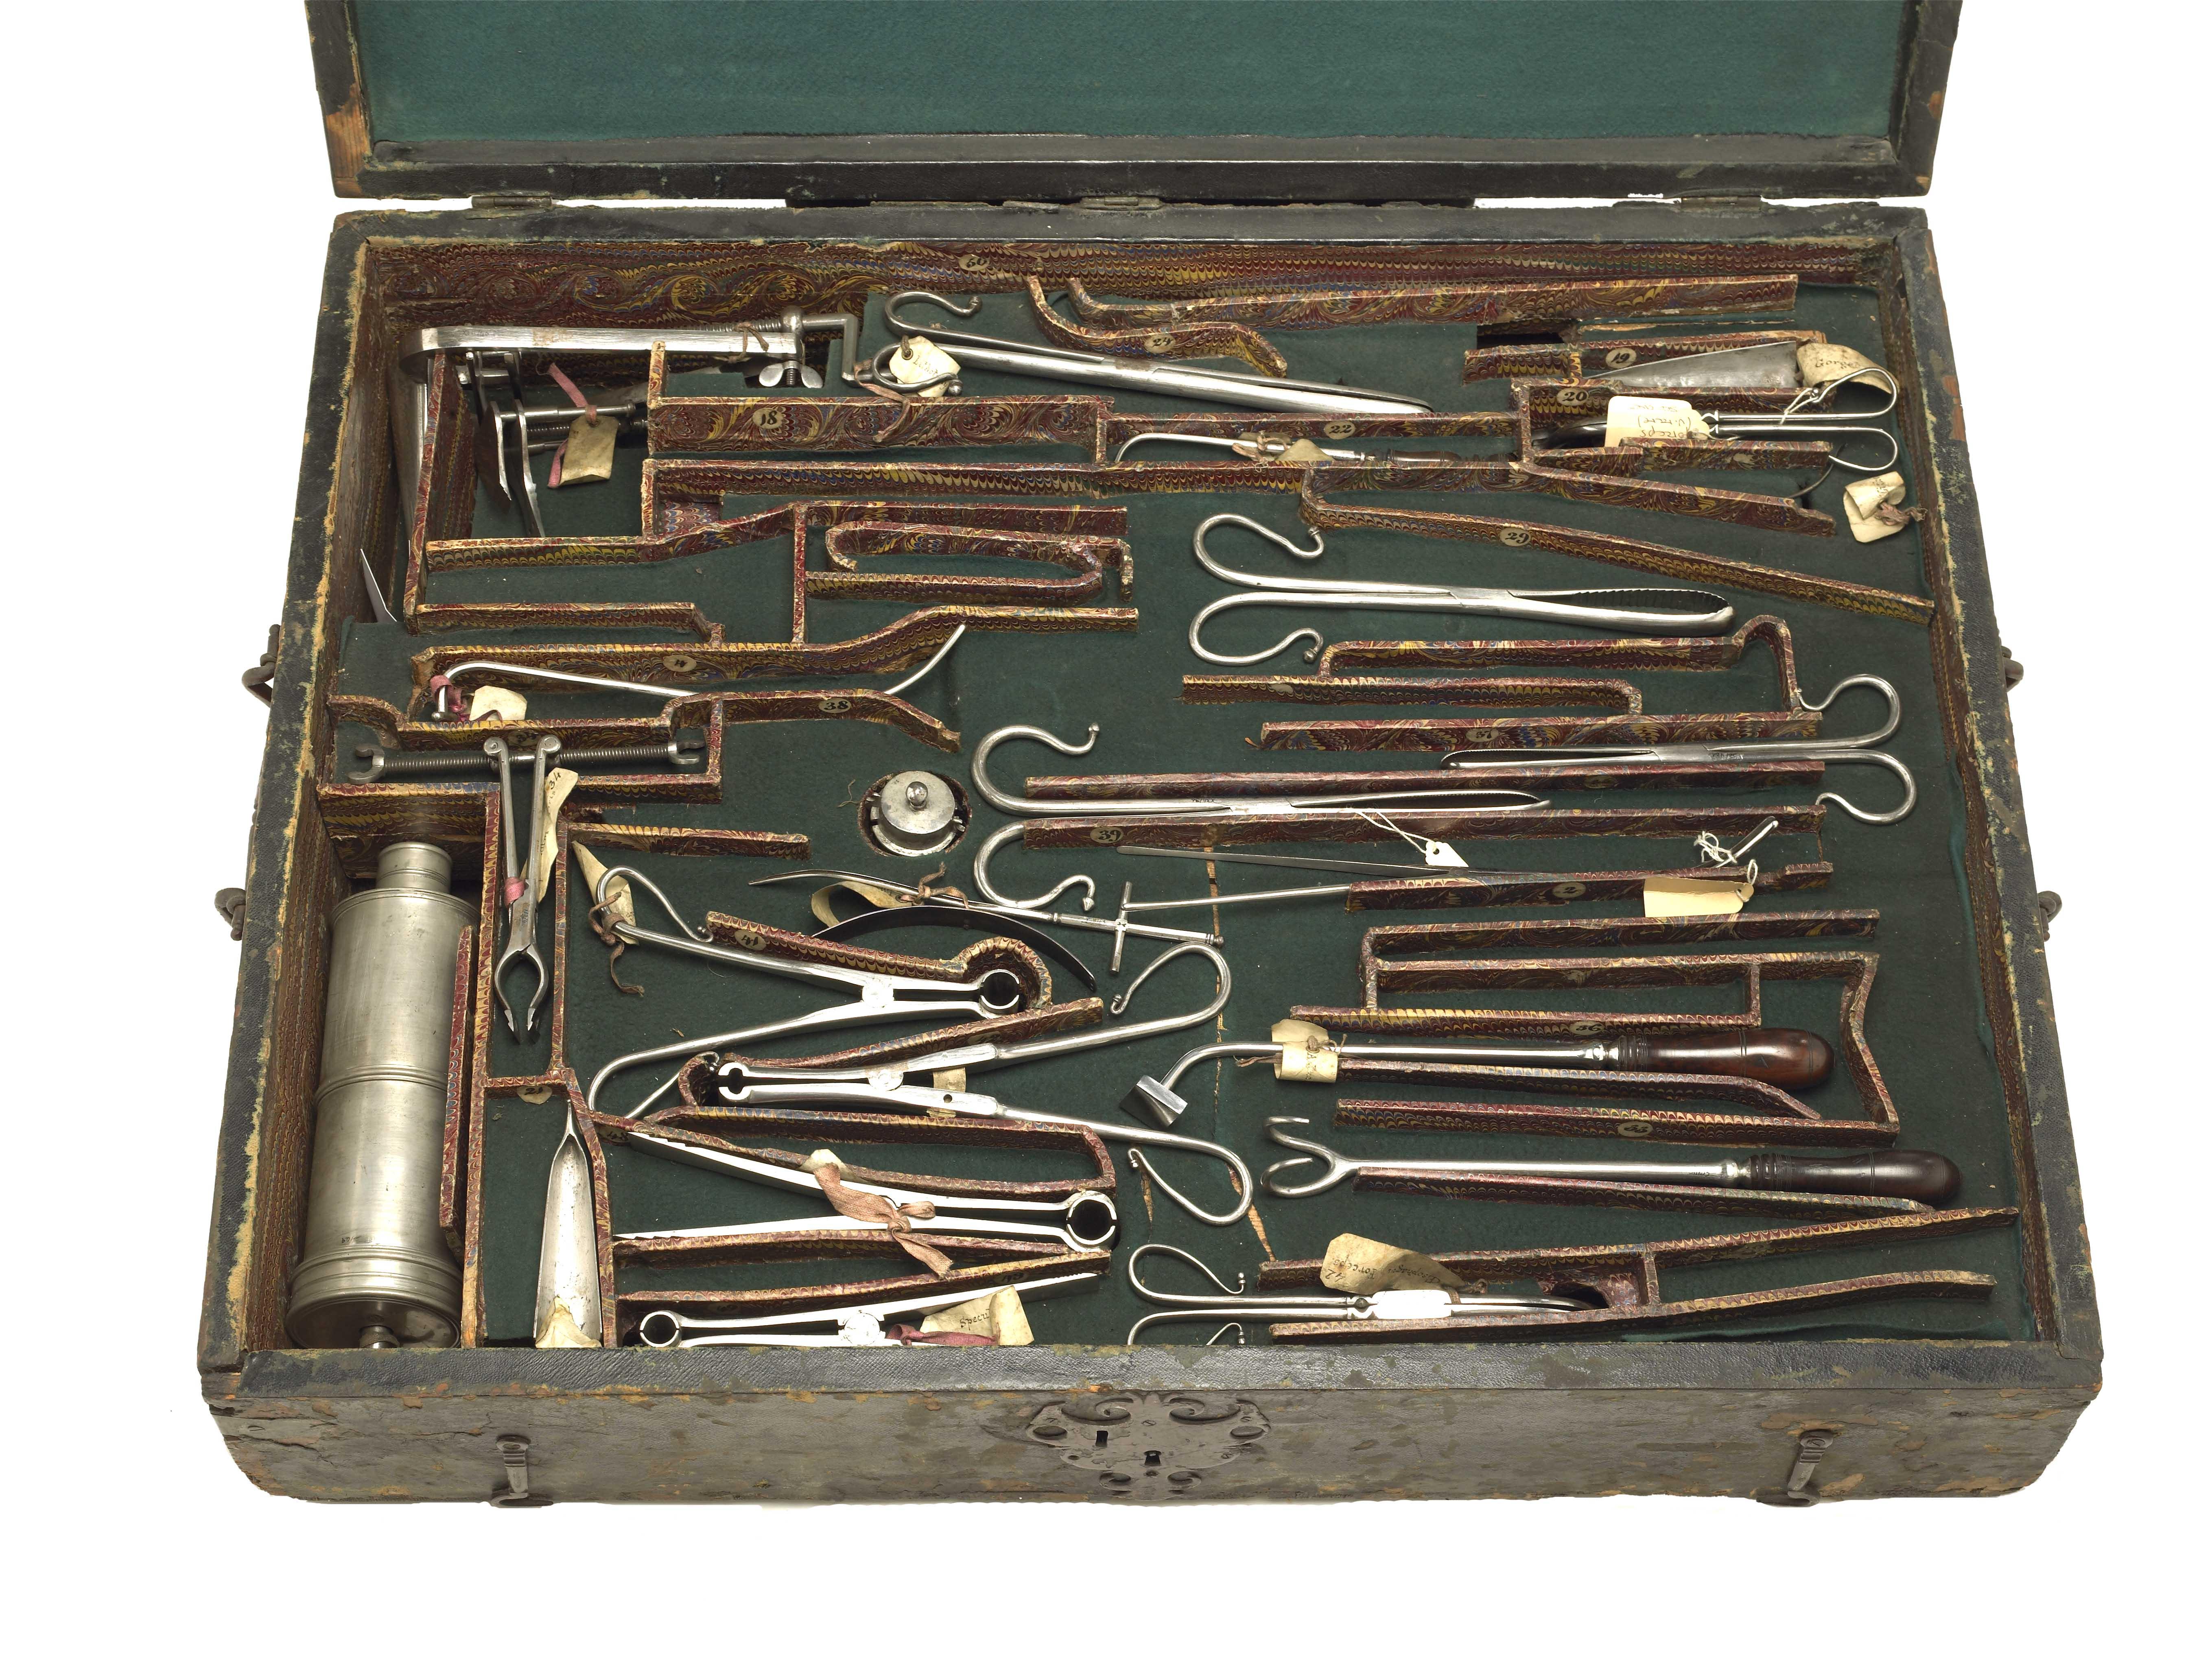 The Prujean chest of surgical instruments